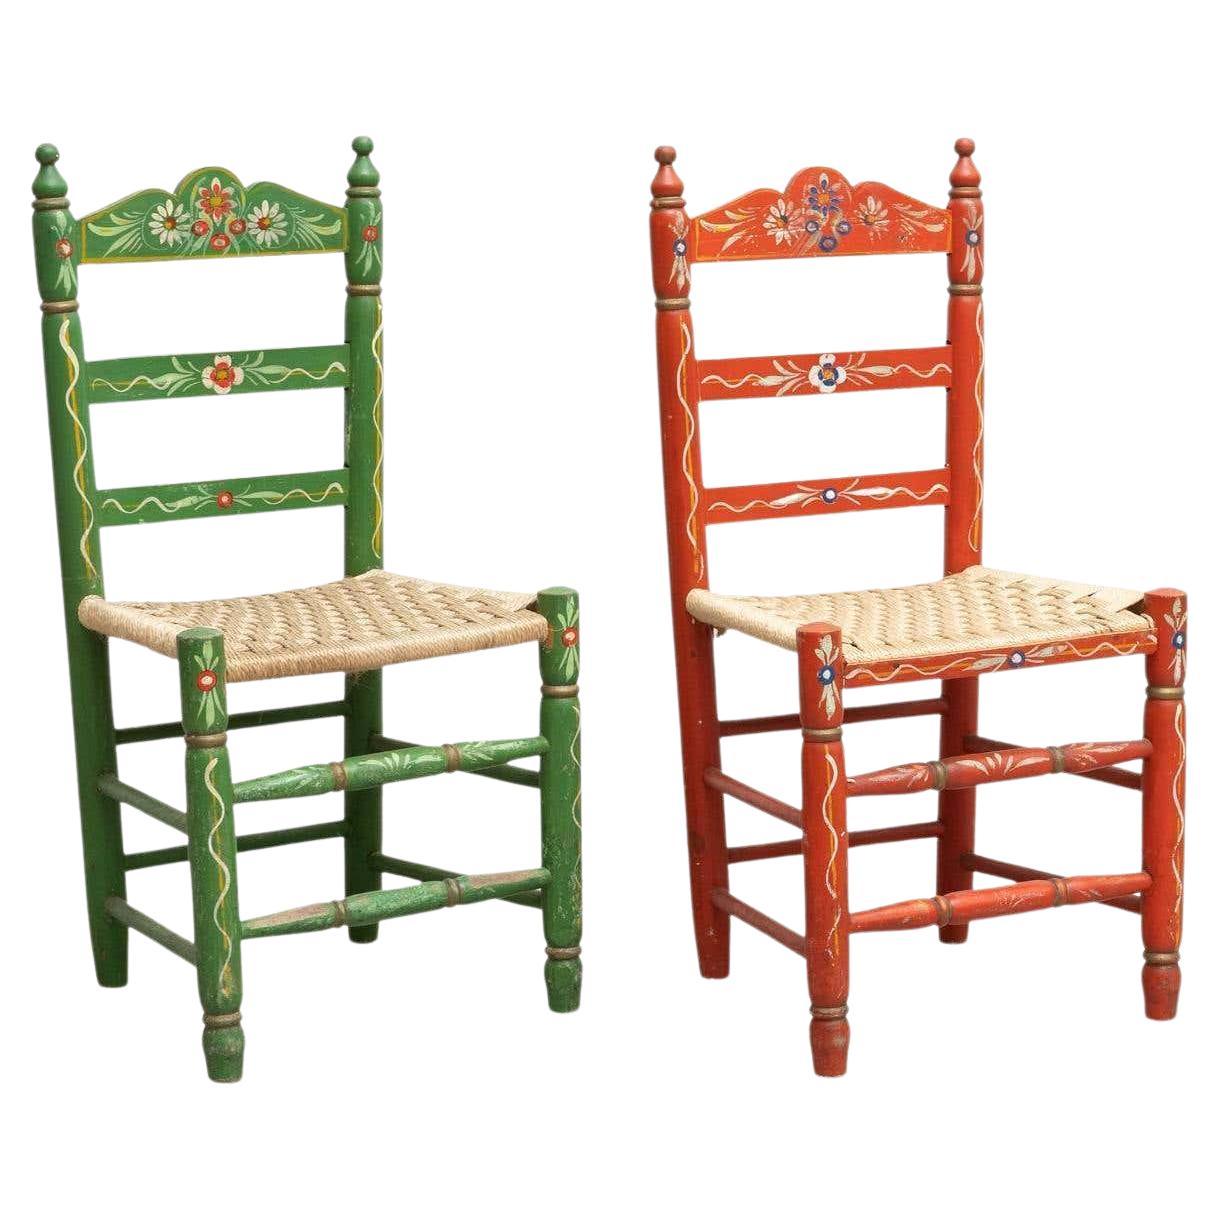 Set of Two Rustic Traditional Hand Painted Wood Chairs, circa 1940